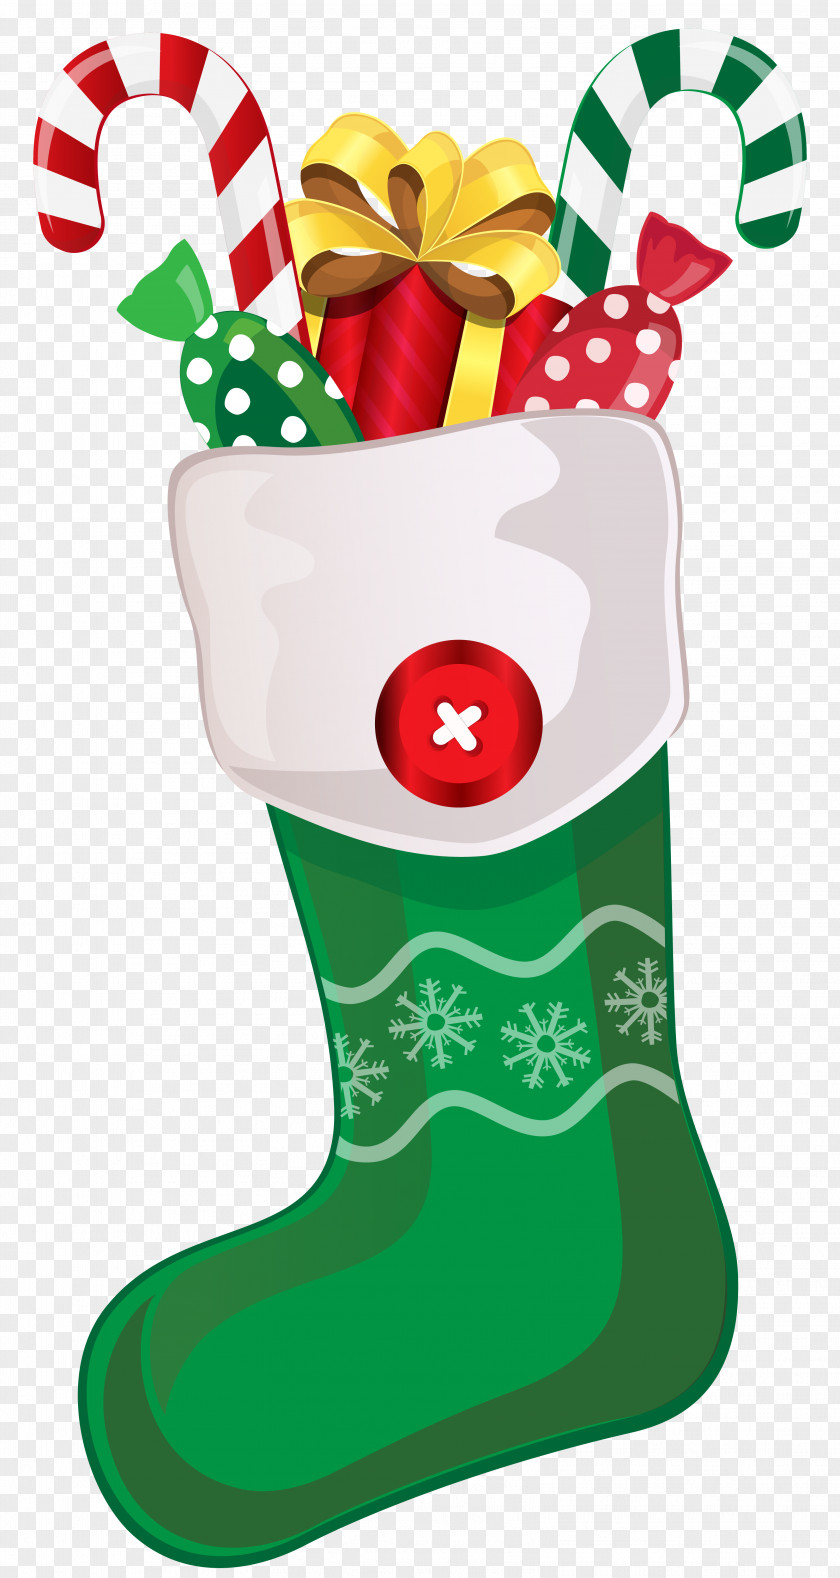 Christmas Green Stocking With Candy Canes Clipart Image Clip Art PNG